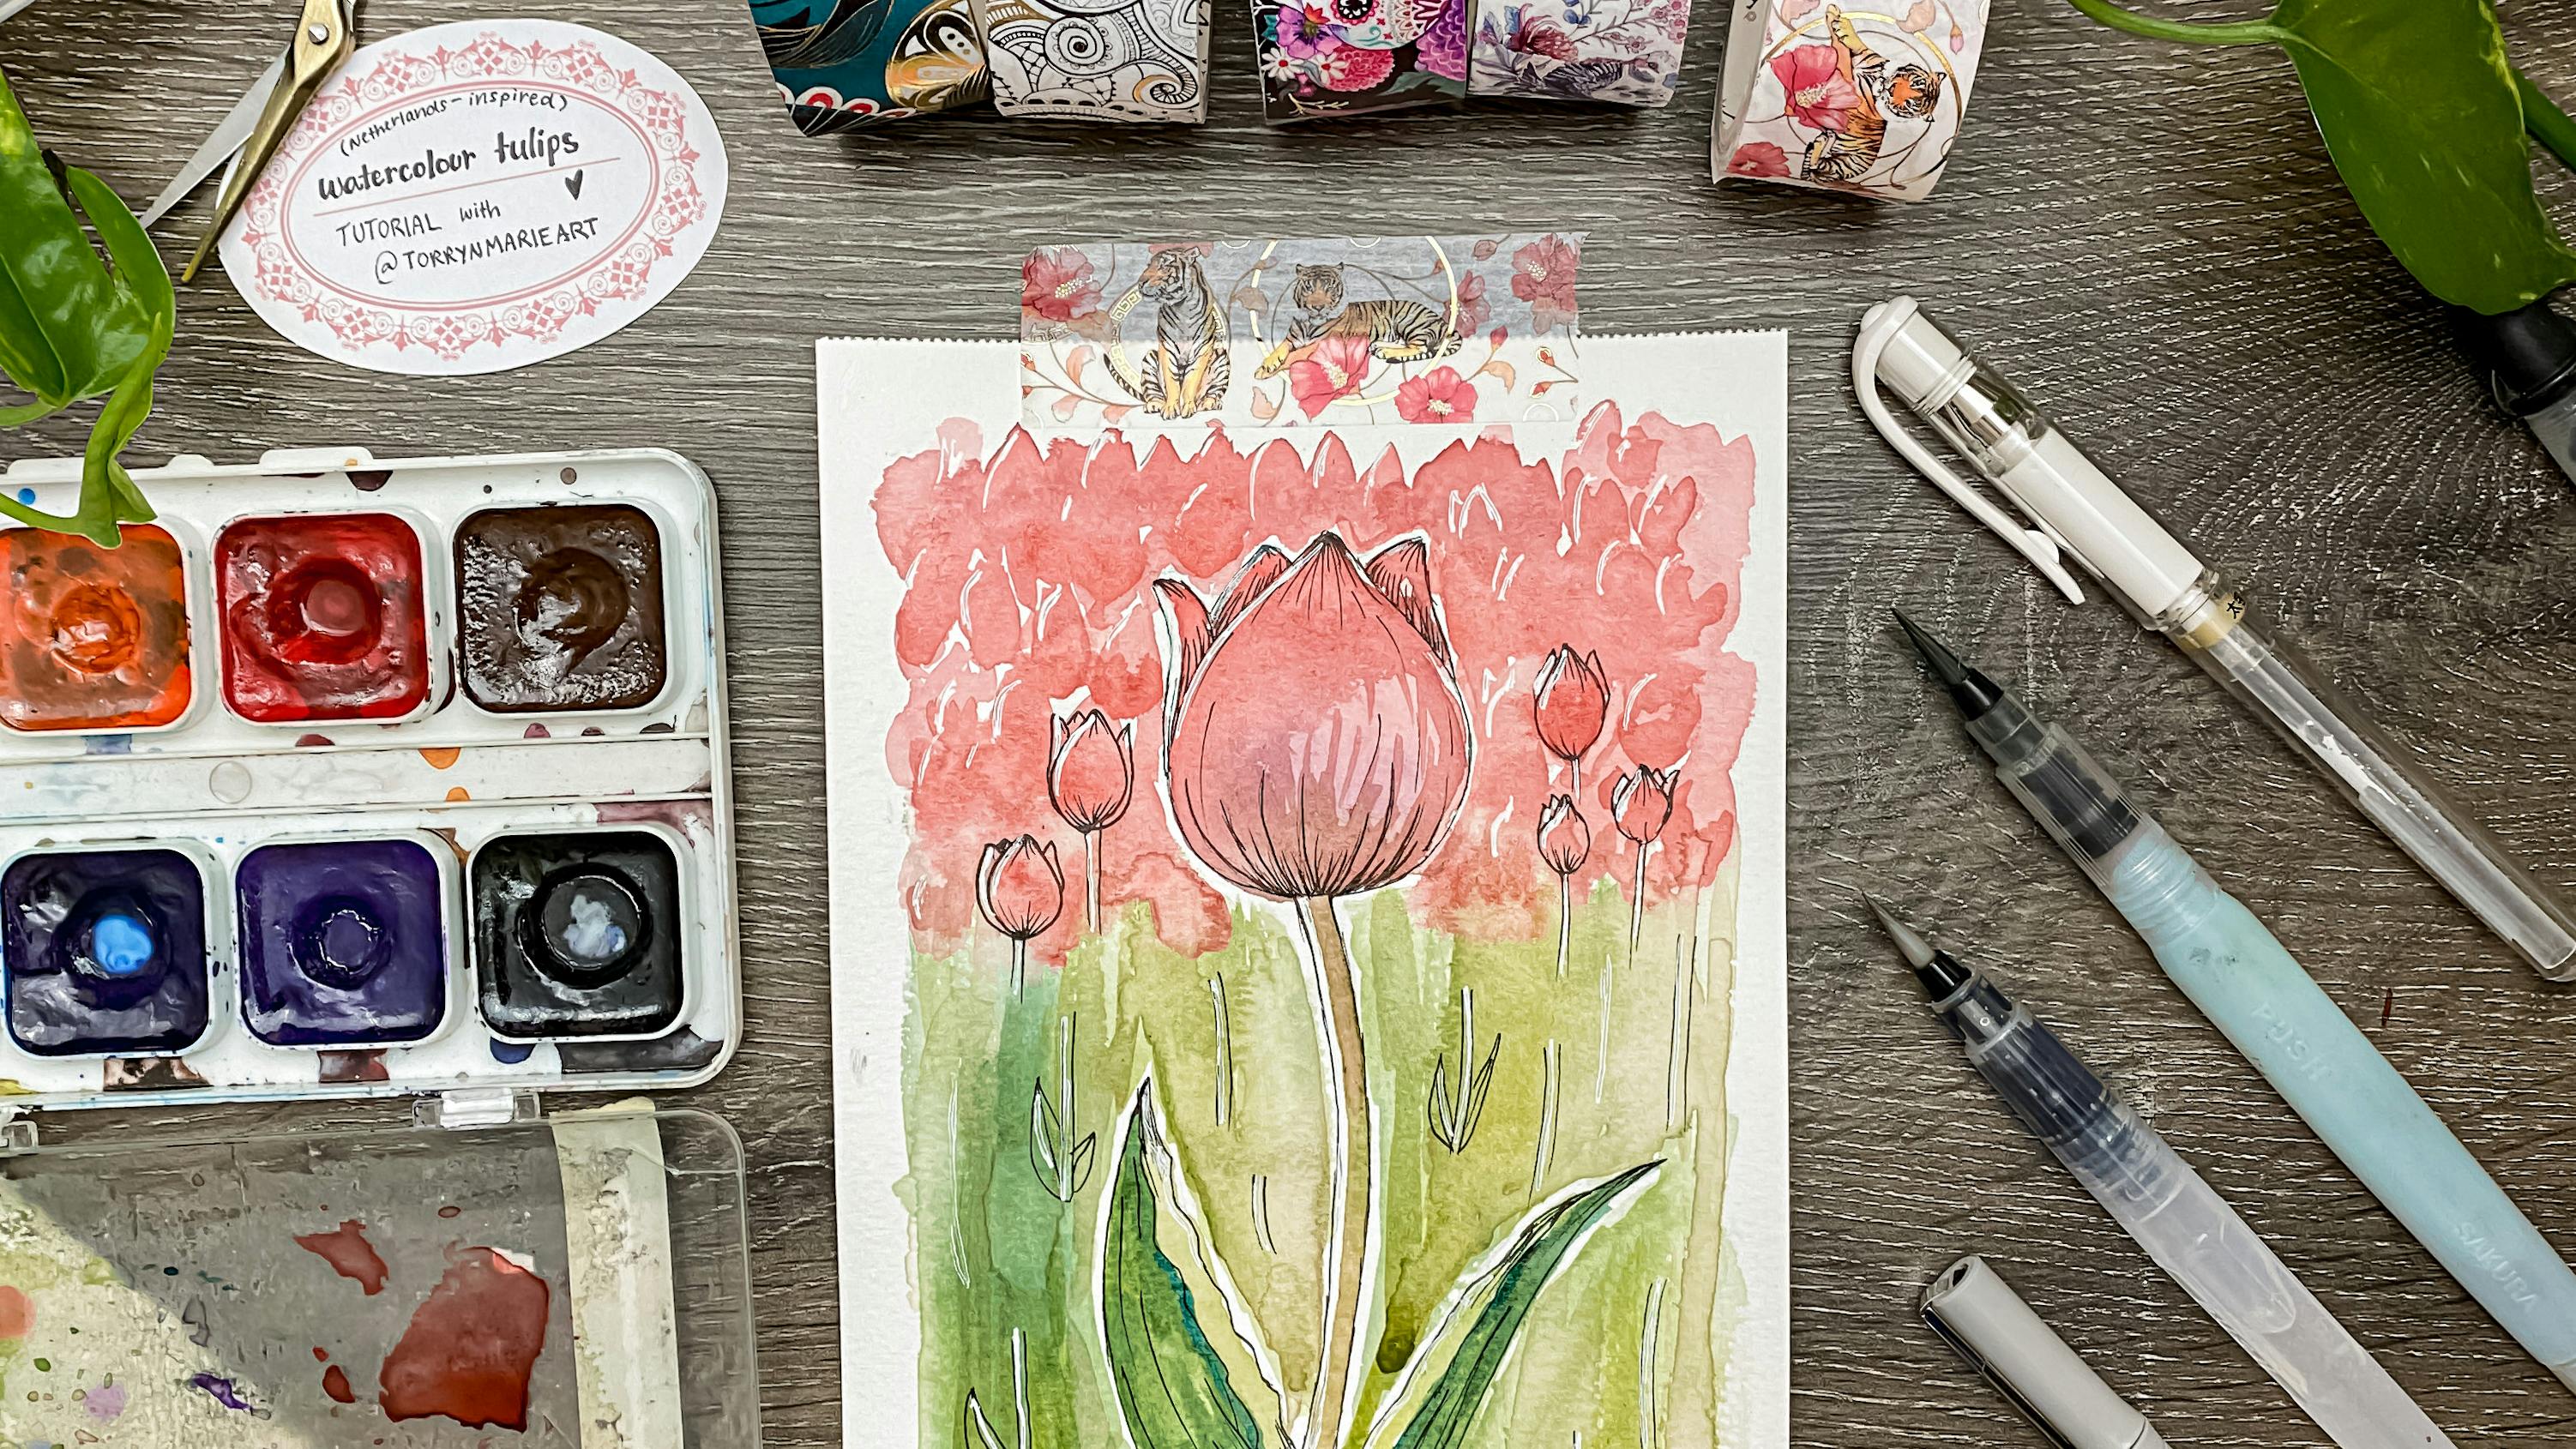 Watercolour Tulips with @torrynmarieart